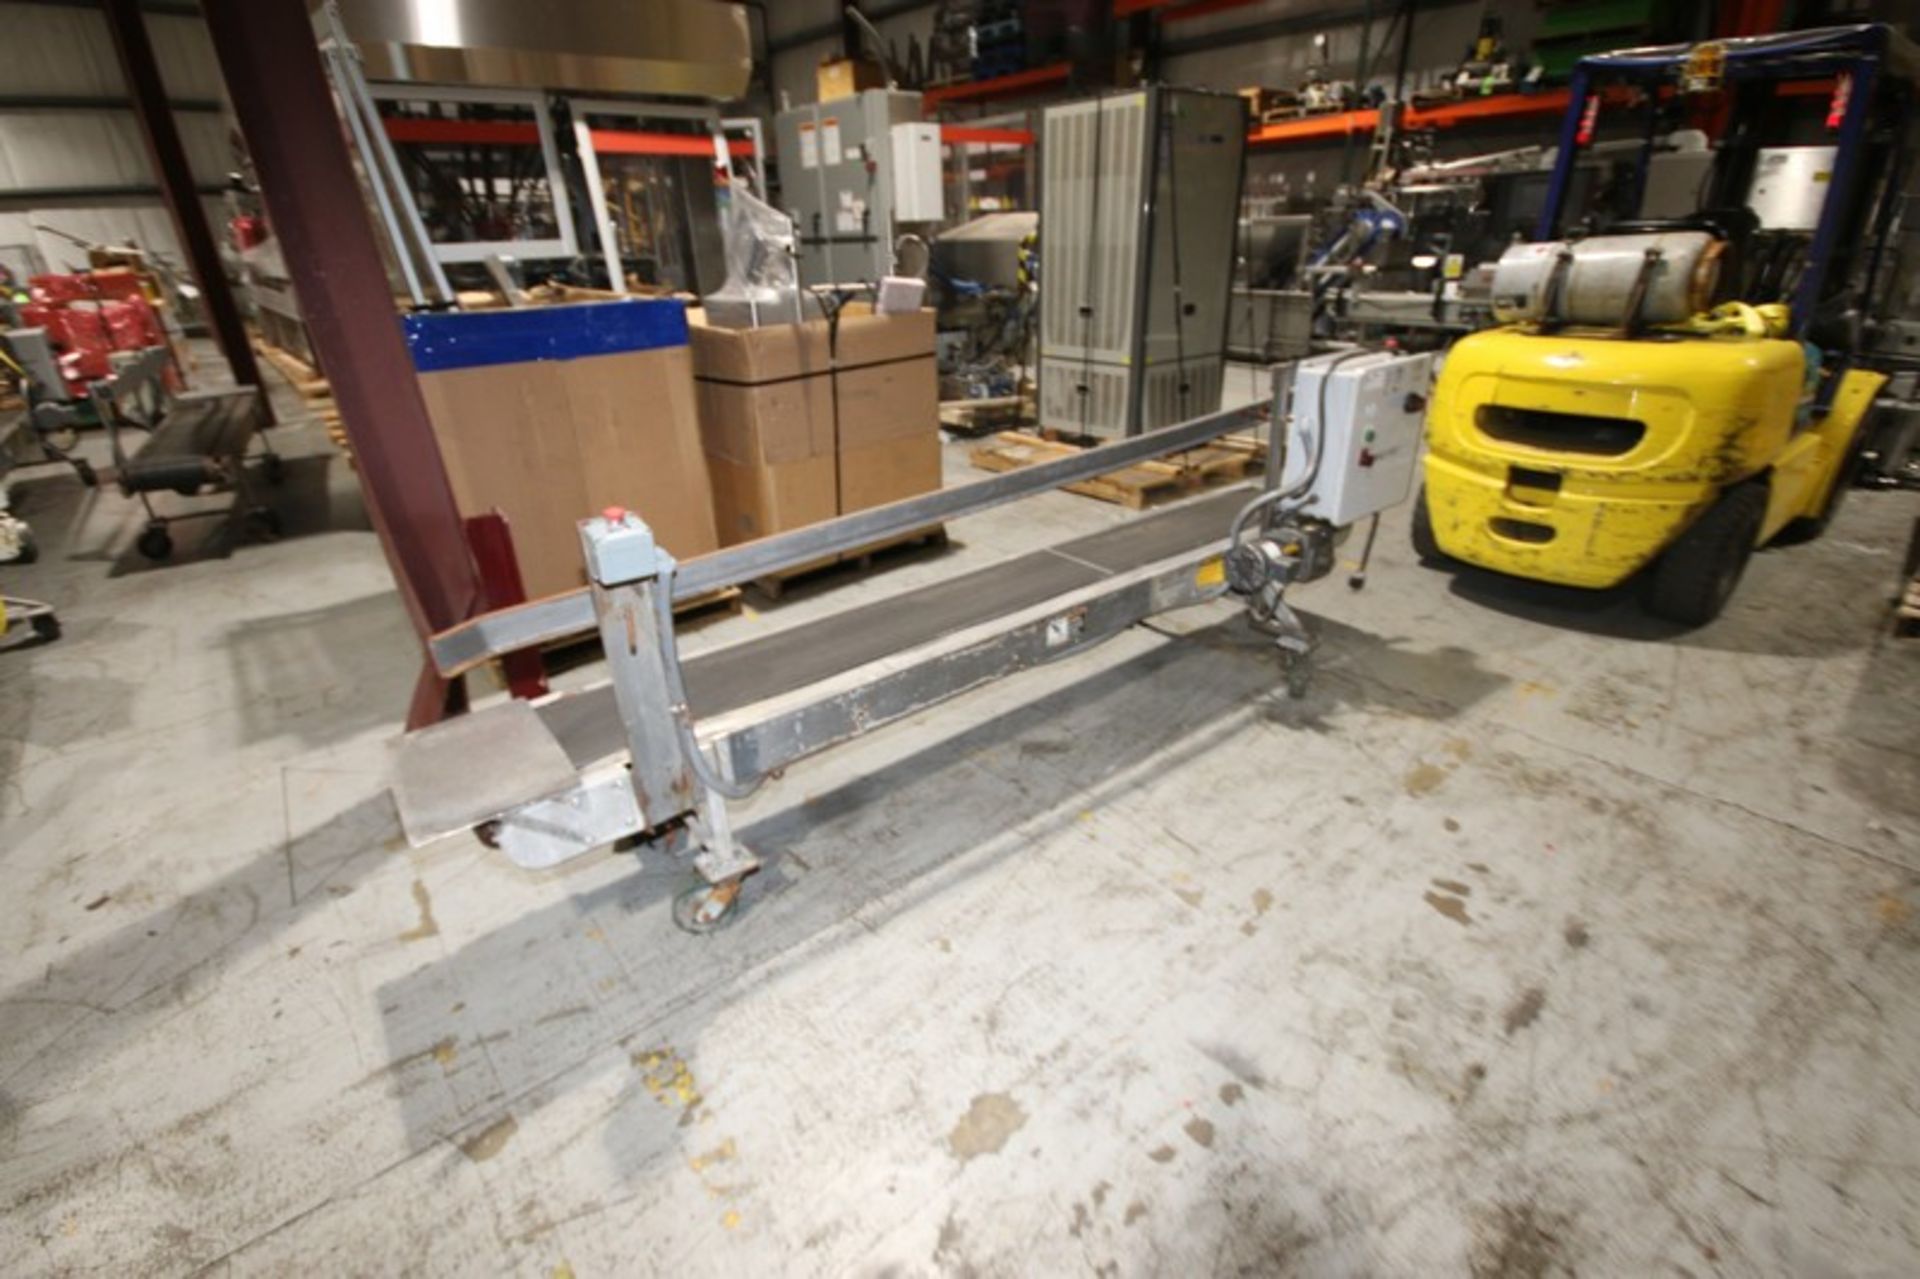 Chantland S/S Portable Power Belt Conveyor, Model 4201, S/N 39282, Overall Dims.: Aprox. 125" L x - Image 2 of 6